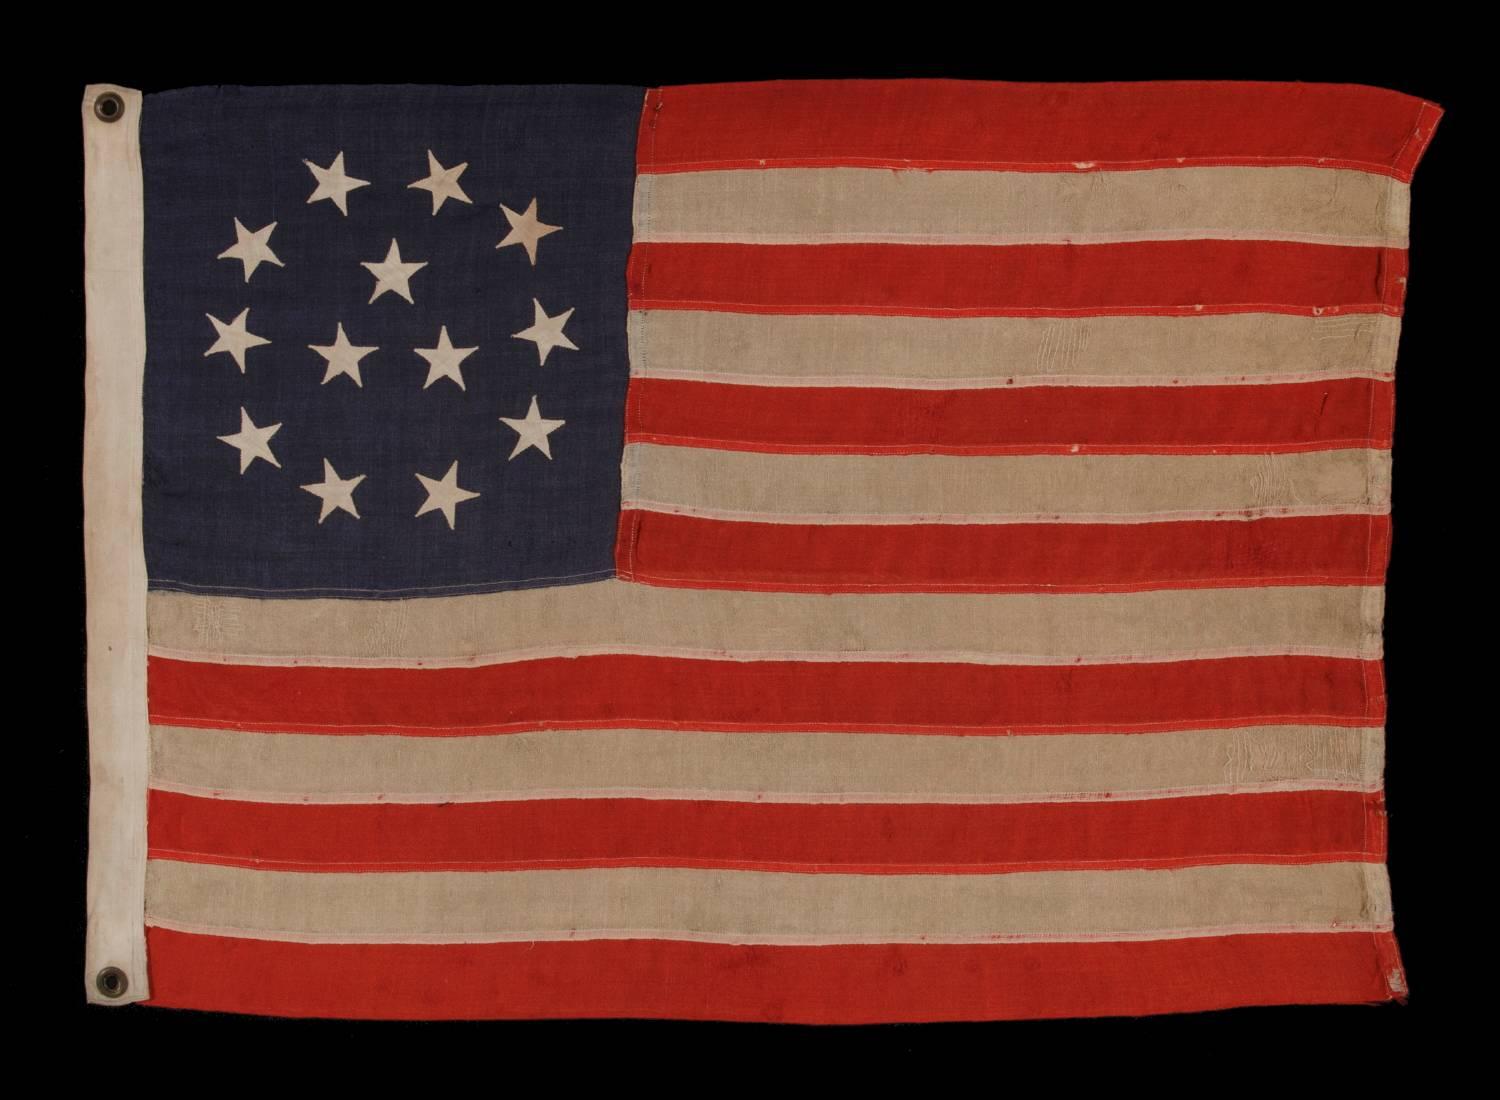 13 stars in wreath pattern with three center stars, one of the most rare 13 star flag designs known to exist, made by C.C. Fuller in Worcester, mass, 1890-1900:

13 star American national flag in a style known to have been made by Charles Chapman